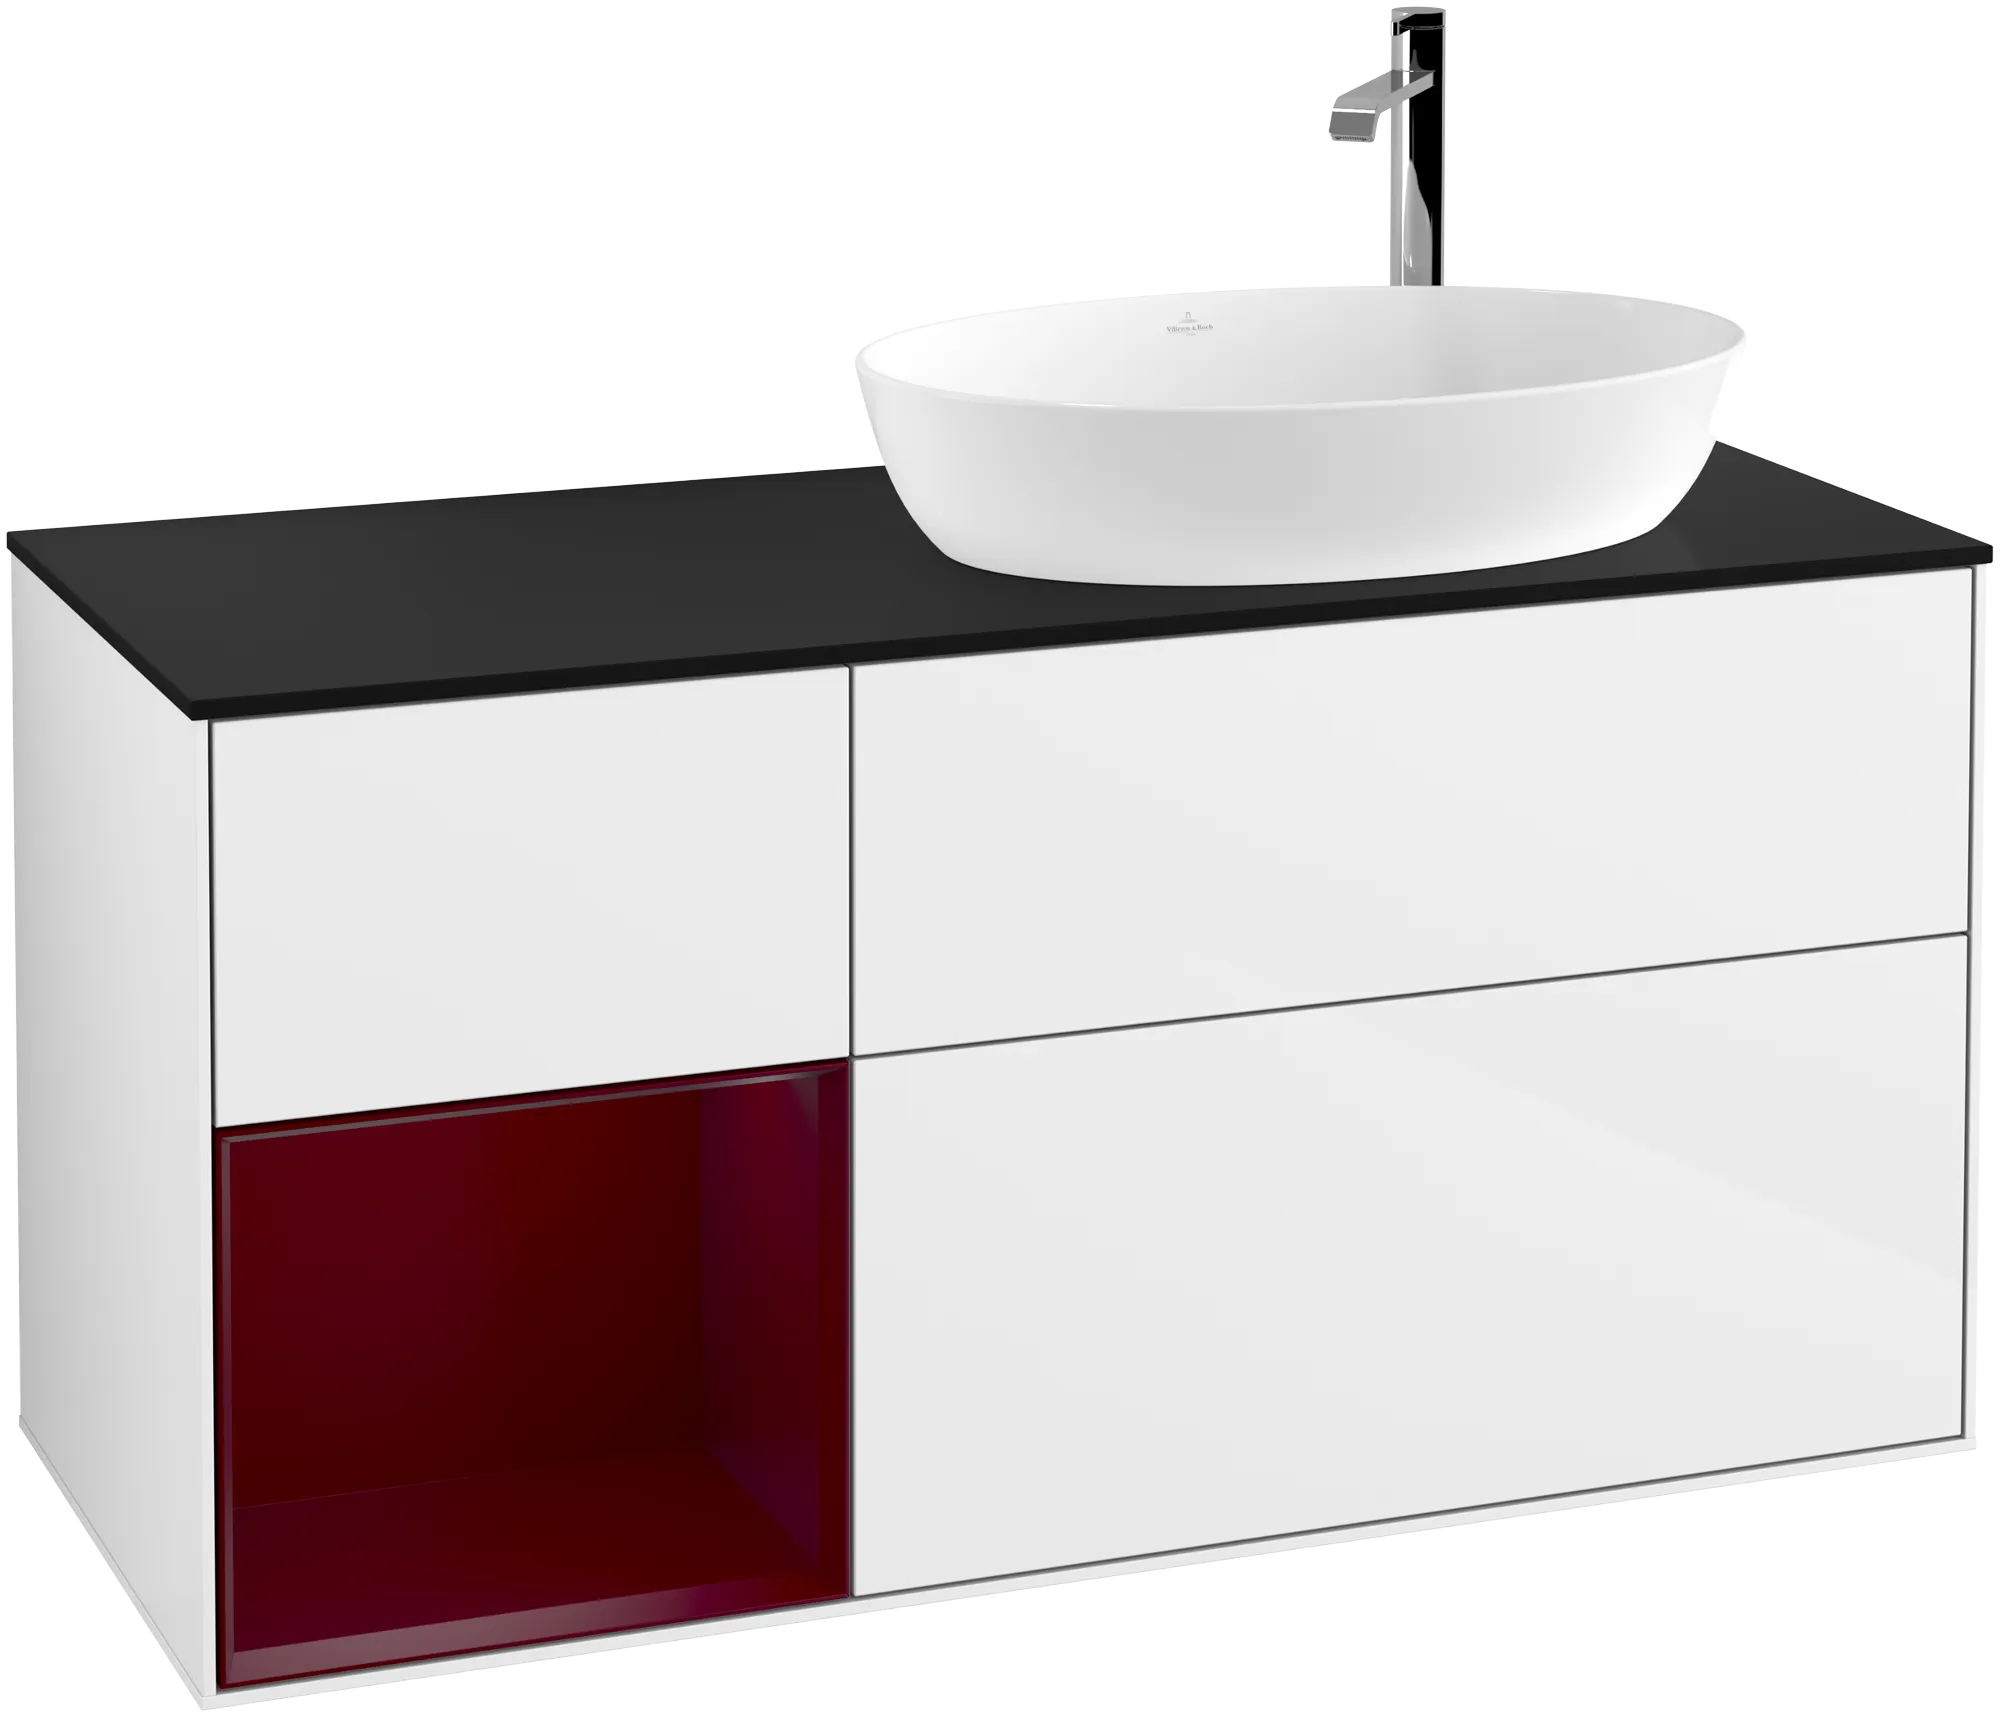 Picture of VILLEROY BOCH Finion Vanity unit, with lighting, 3 pull-out compartments, 1200 x 603 x 501 mm, Glossy White Lacquer / Peony Matt Lacquer / Glass Black Matt #G922HBGF